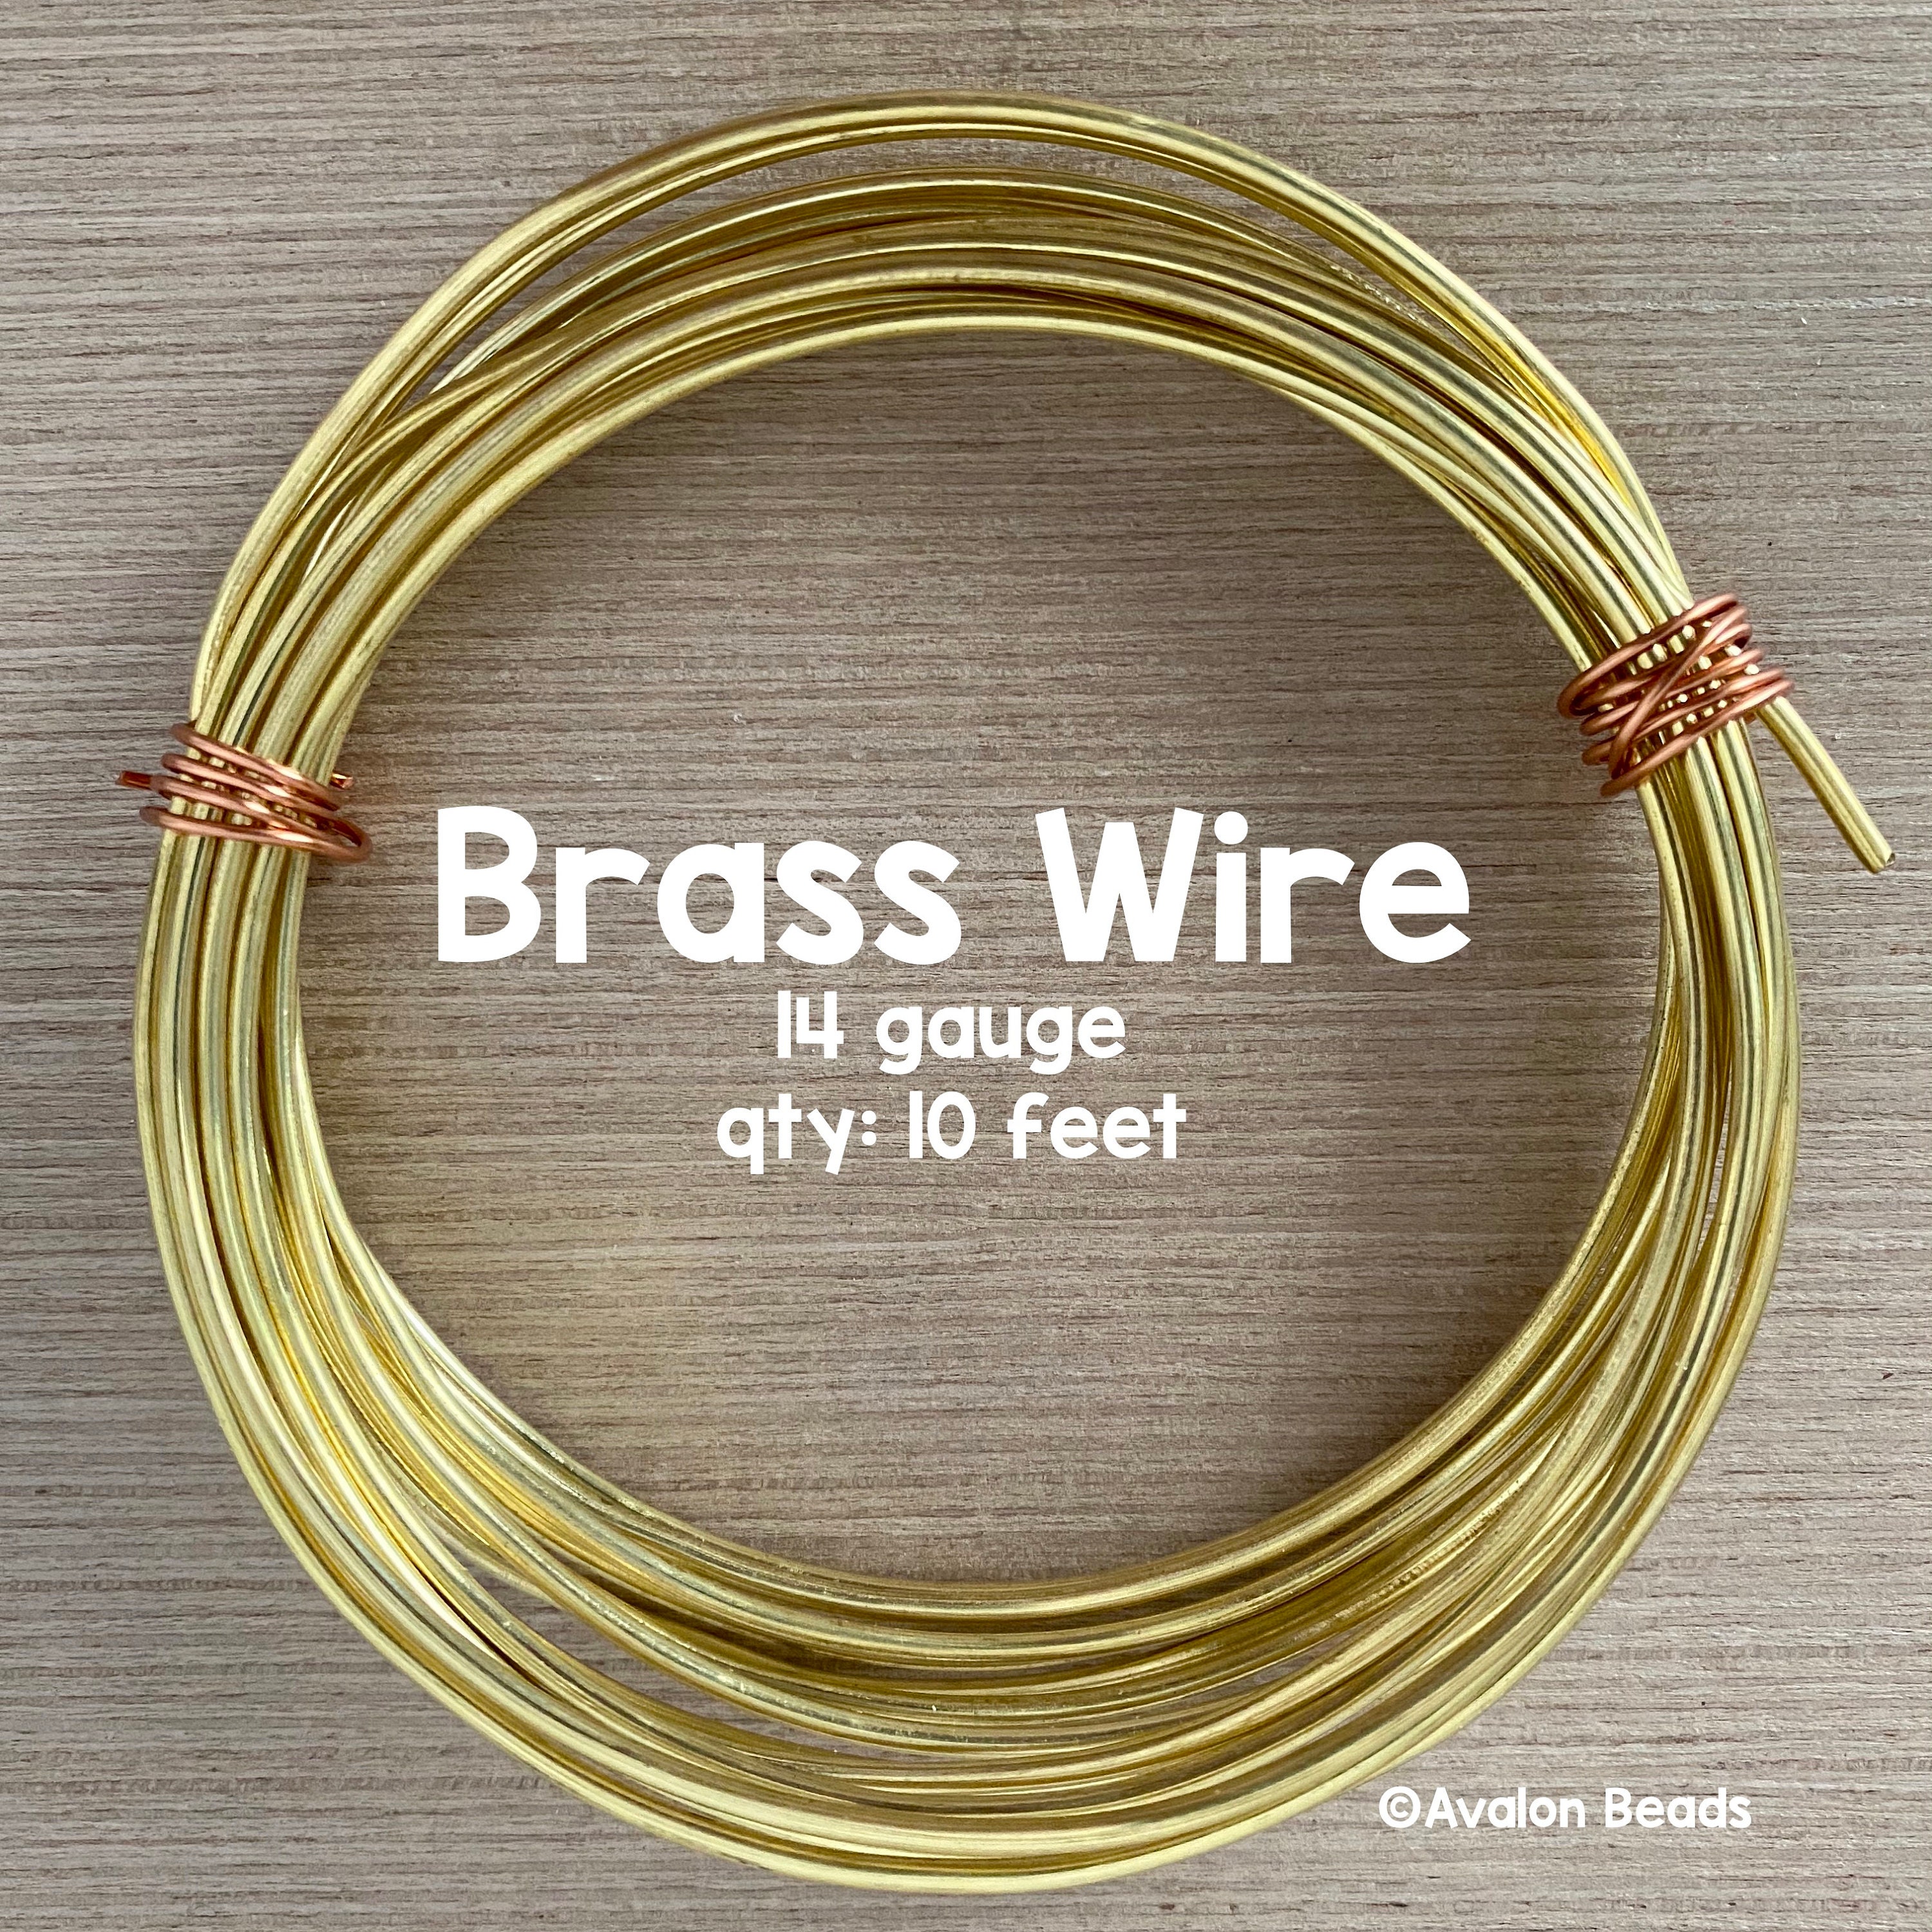 Brass Wire Brass EDM Wire Brass Soldering Wire Brass Bare Wire for  Industrial Use, Jewelry Making, Beading, DIY Art Craft Projects Diameter 16  Gauge